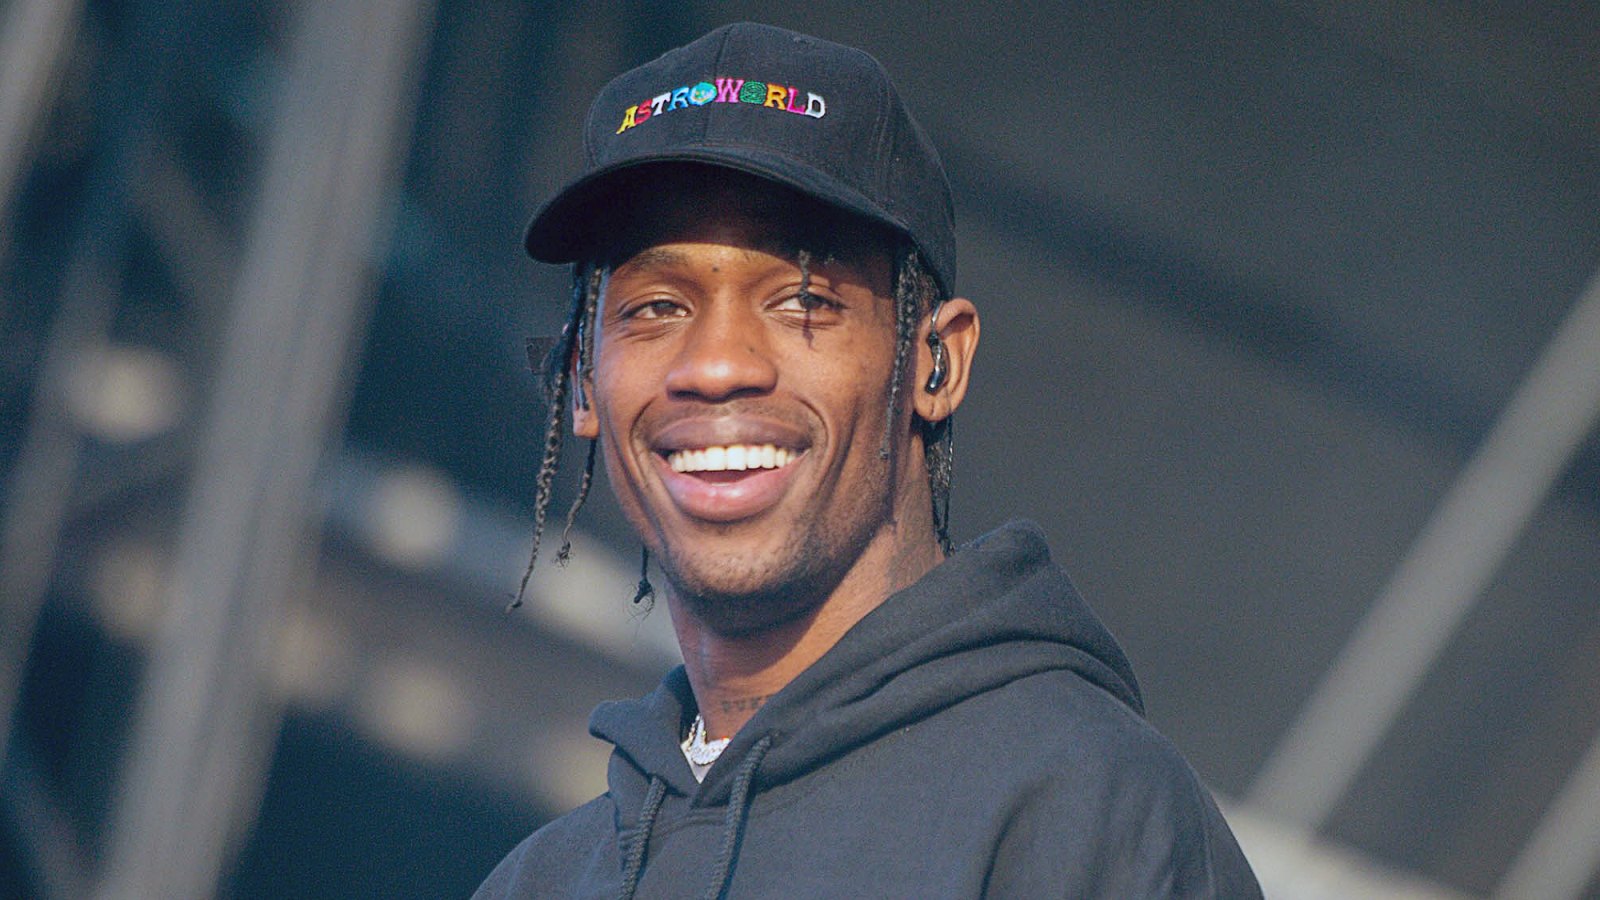 McDonald's to Launch 'The Travis Scott Meal' in Collaboration With the Rapper: What's Inside?